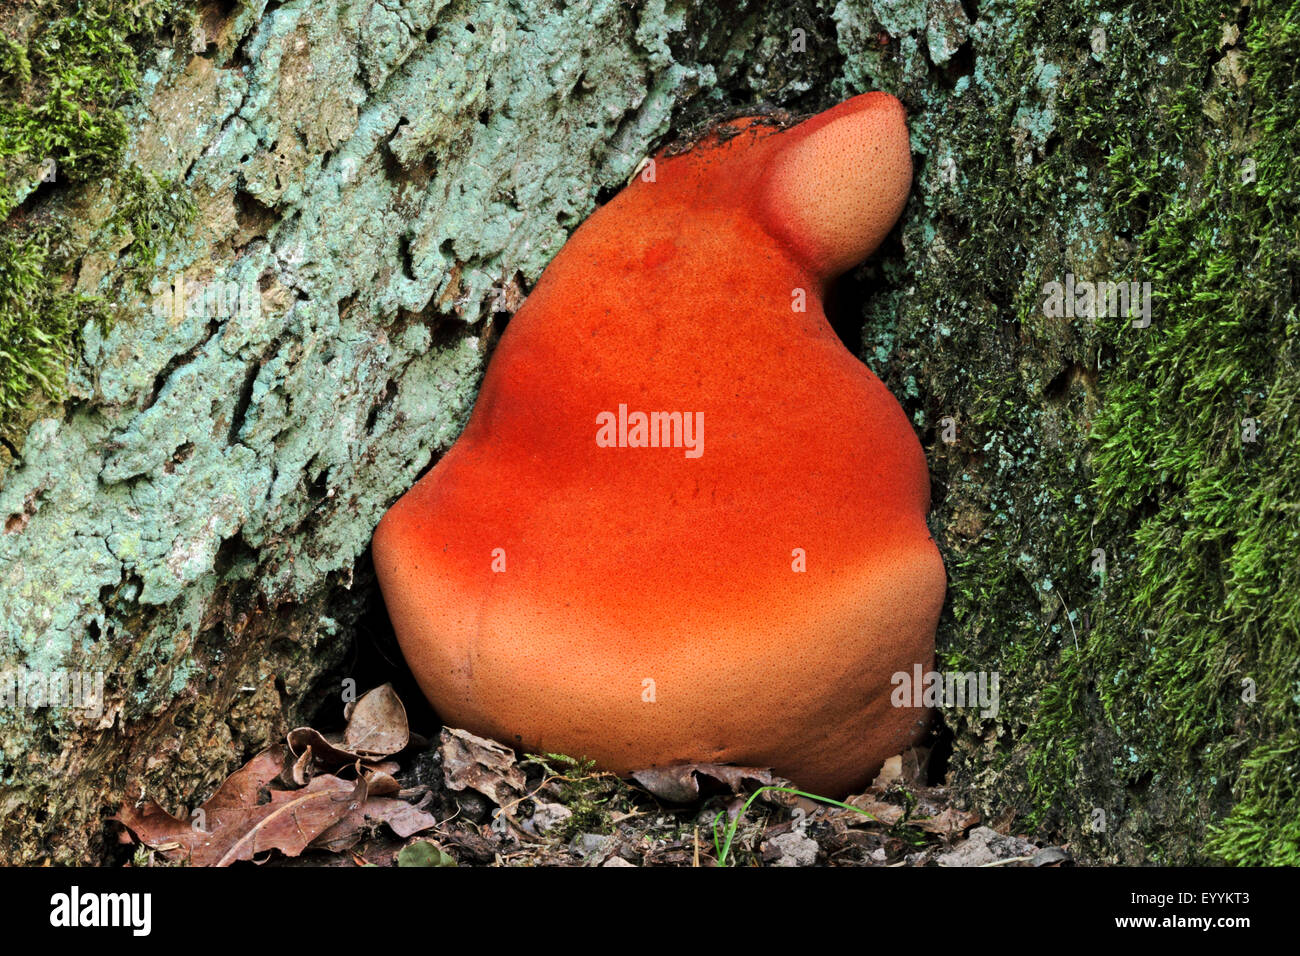 beefsteak fungus (Fistulina hepatica), at the base of a tree trunk, Germany Stock Photo